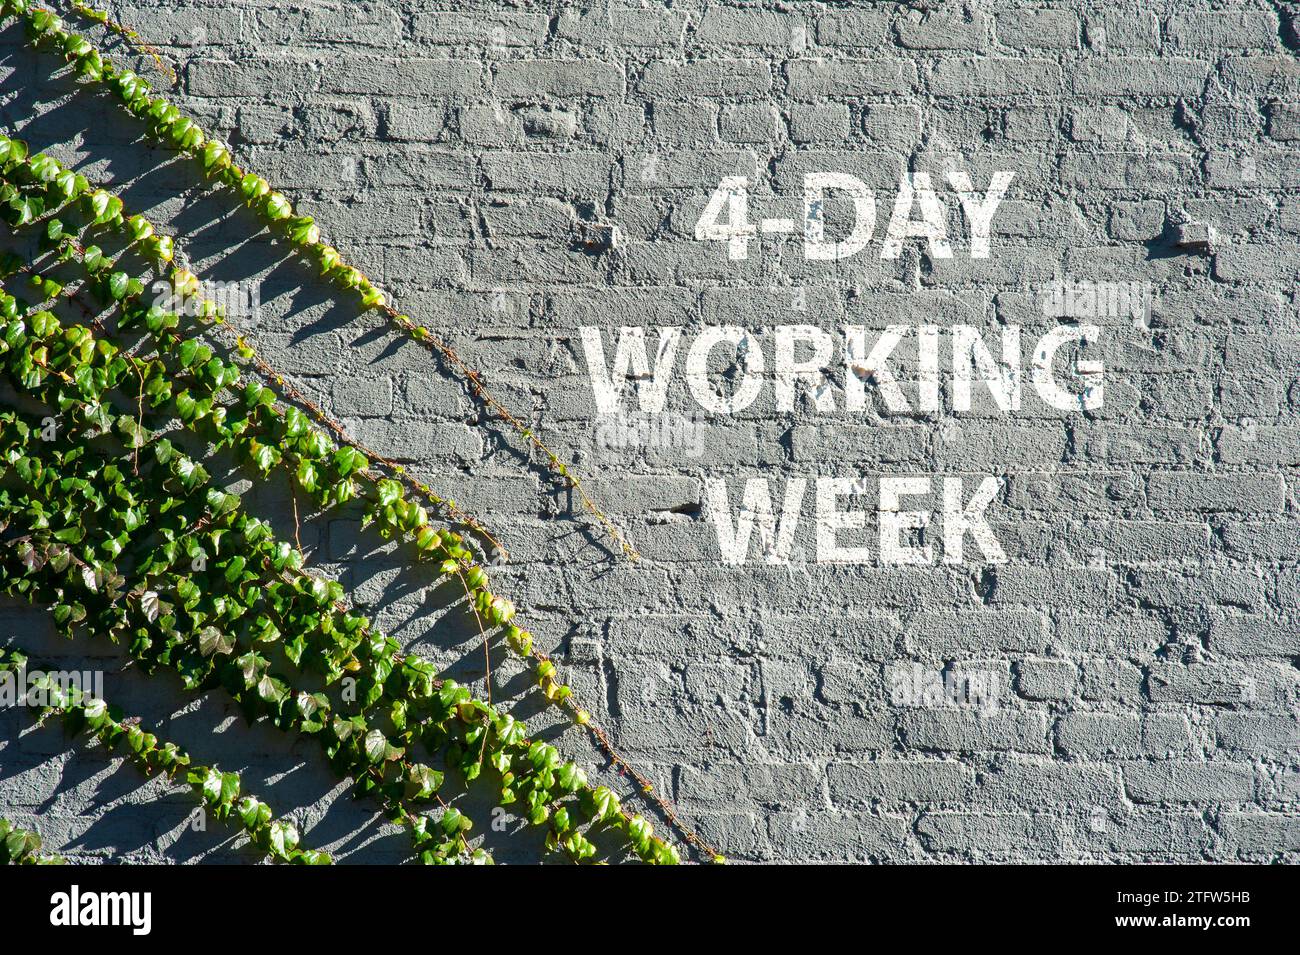 4 - Day working week on a brick wall with green leaves symbolizing nature taking over urban life. Stock Photo